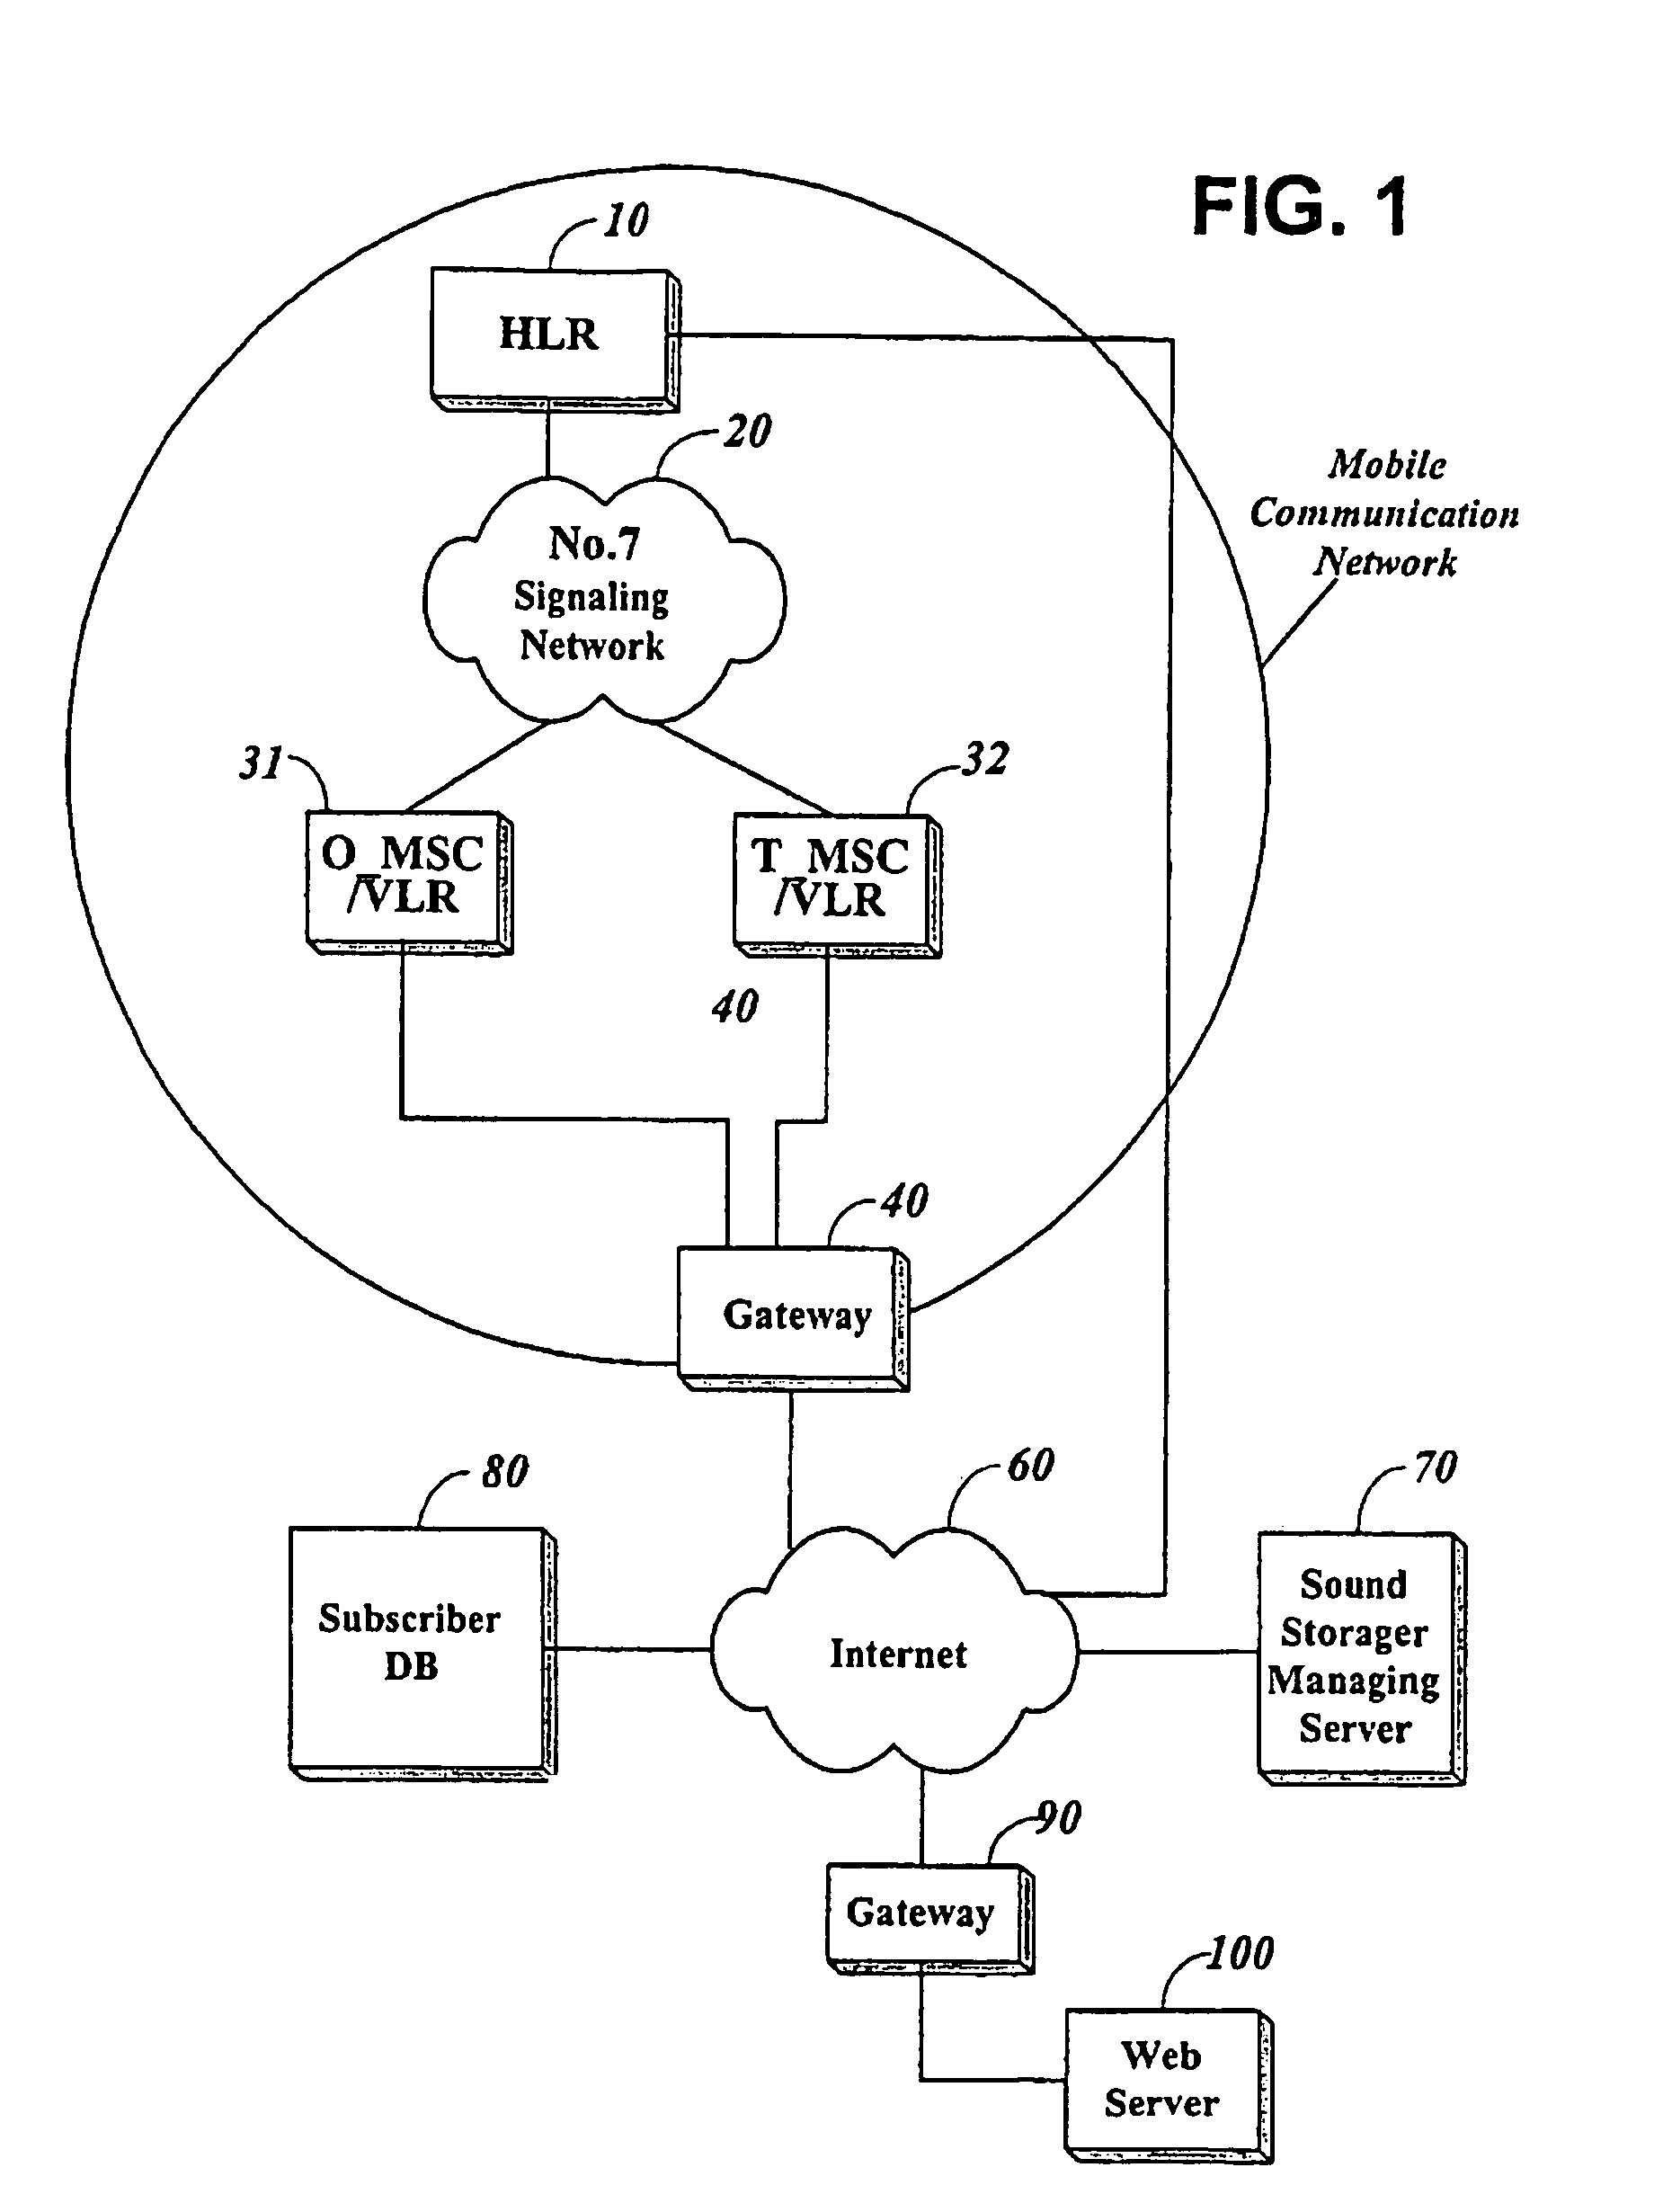 Method for providing a subscriber-based ringback tone sound stored in a mobile exchanger